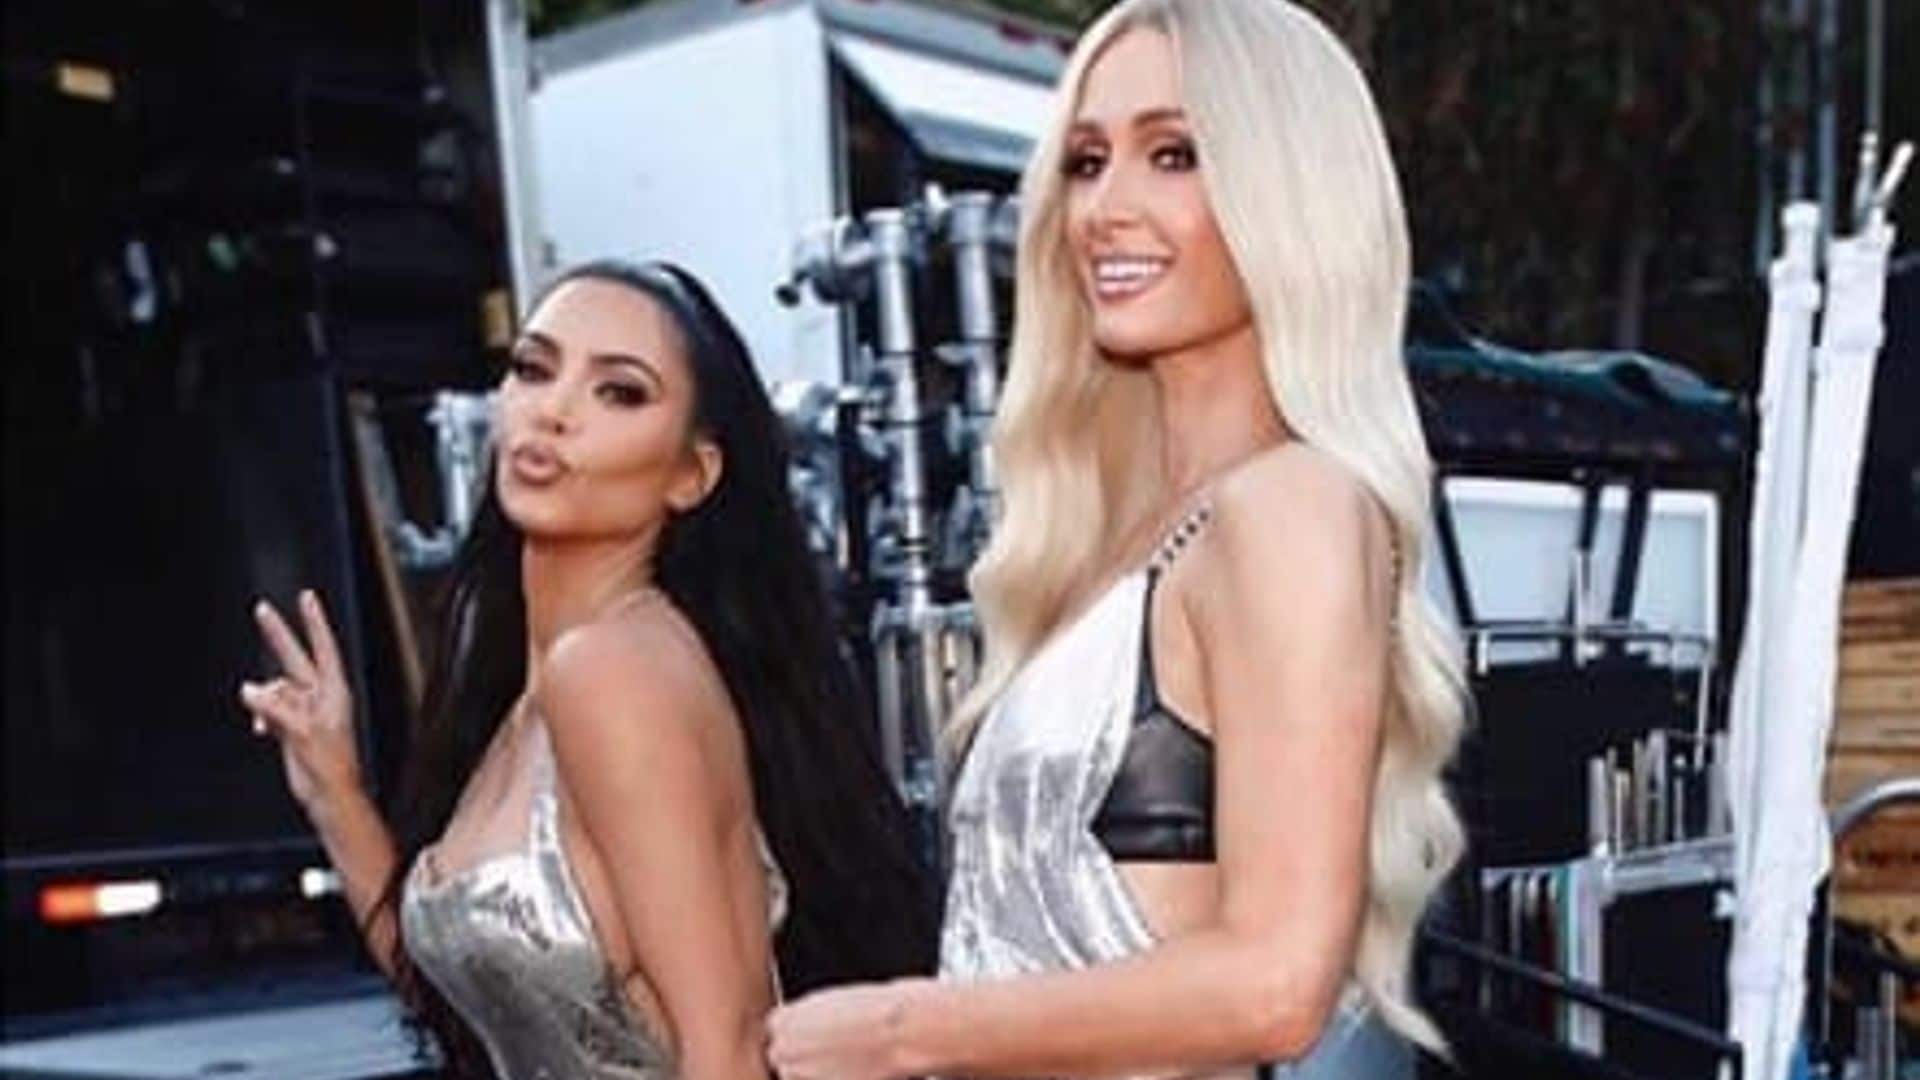 Paris Hilton froze her eggs after Kim Kardashian talked her into it: “ I was so inspired by her to actually do it”